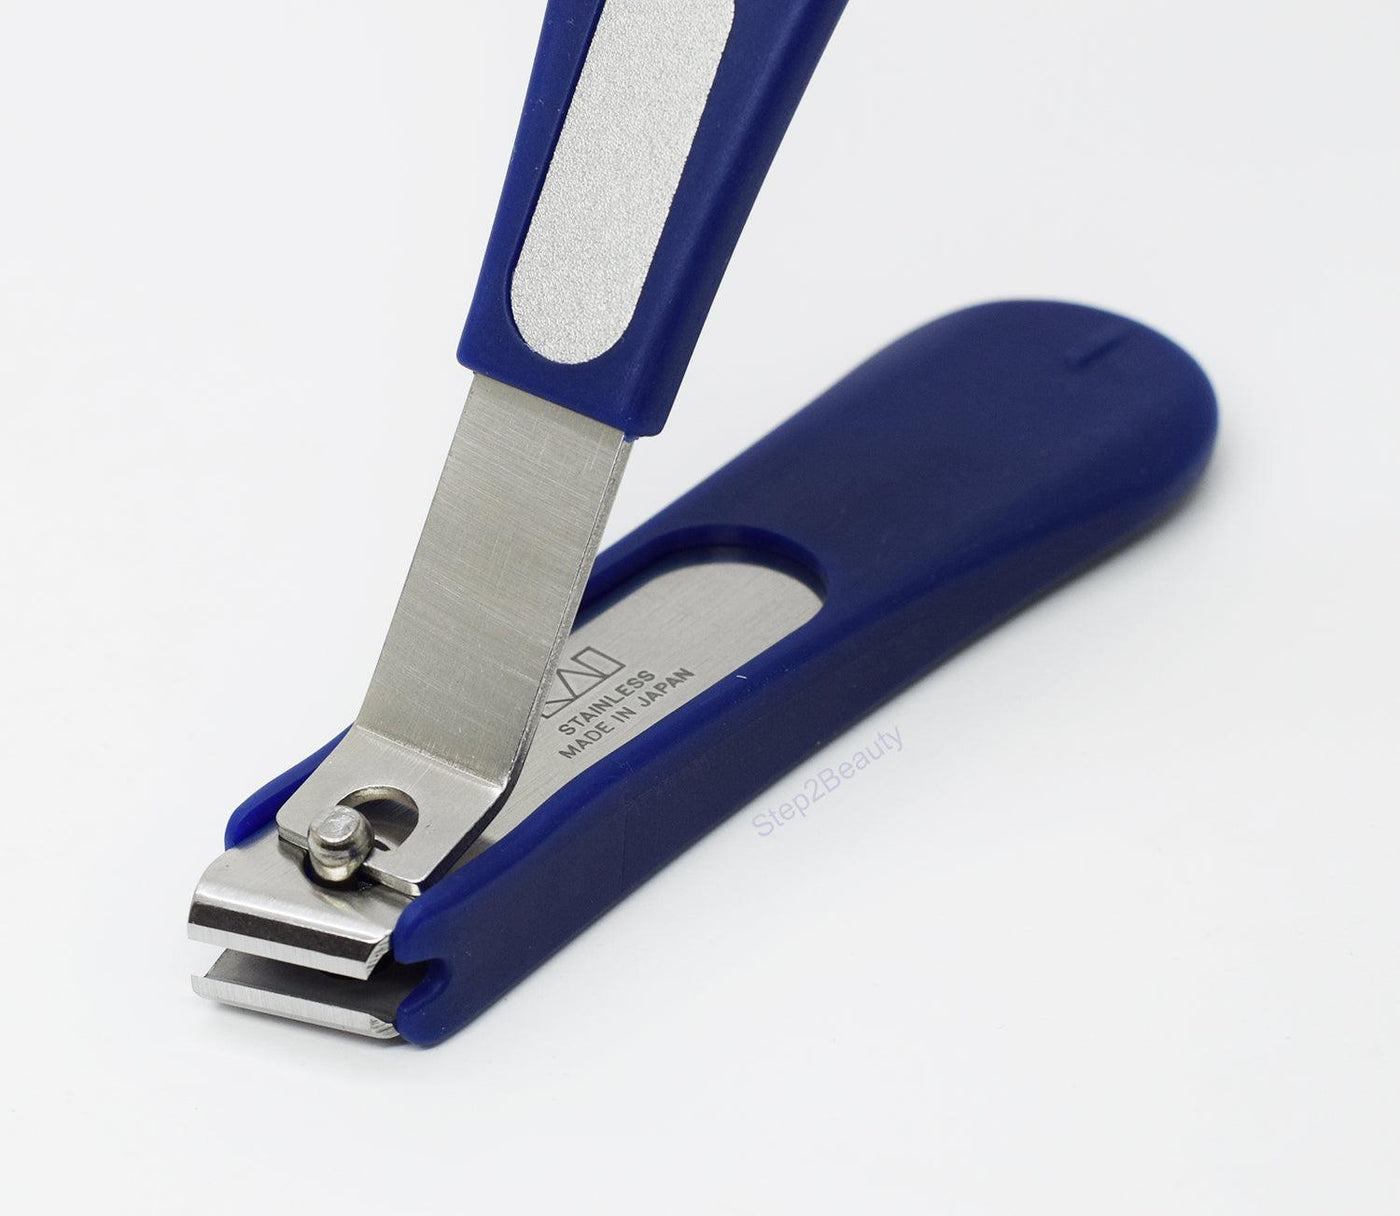 mehaz nail clippers